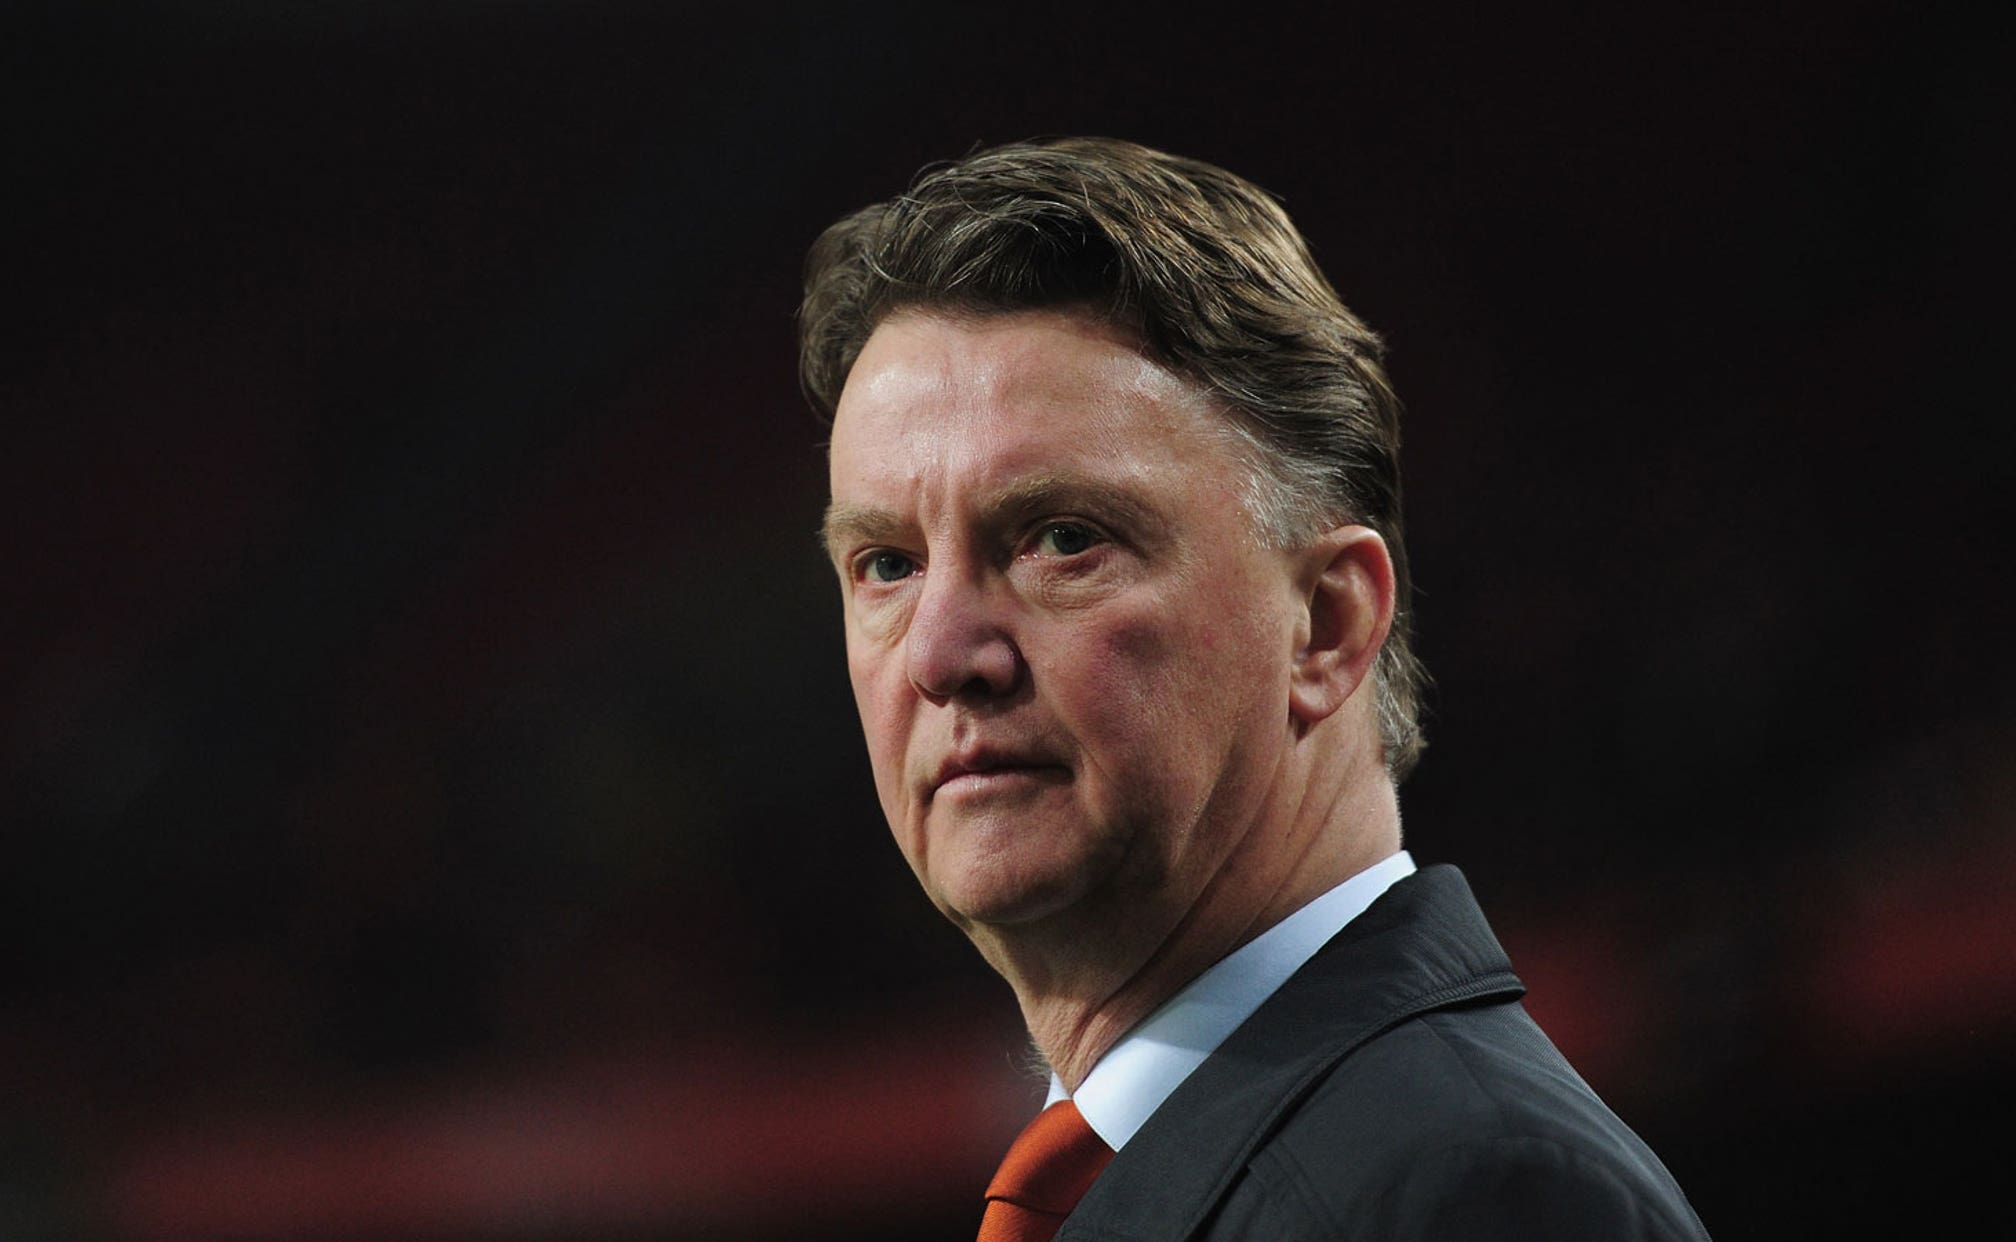 Van Gaal is remaining coy on Manchester United speculation | FOX Sports